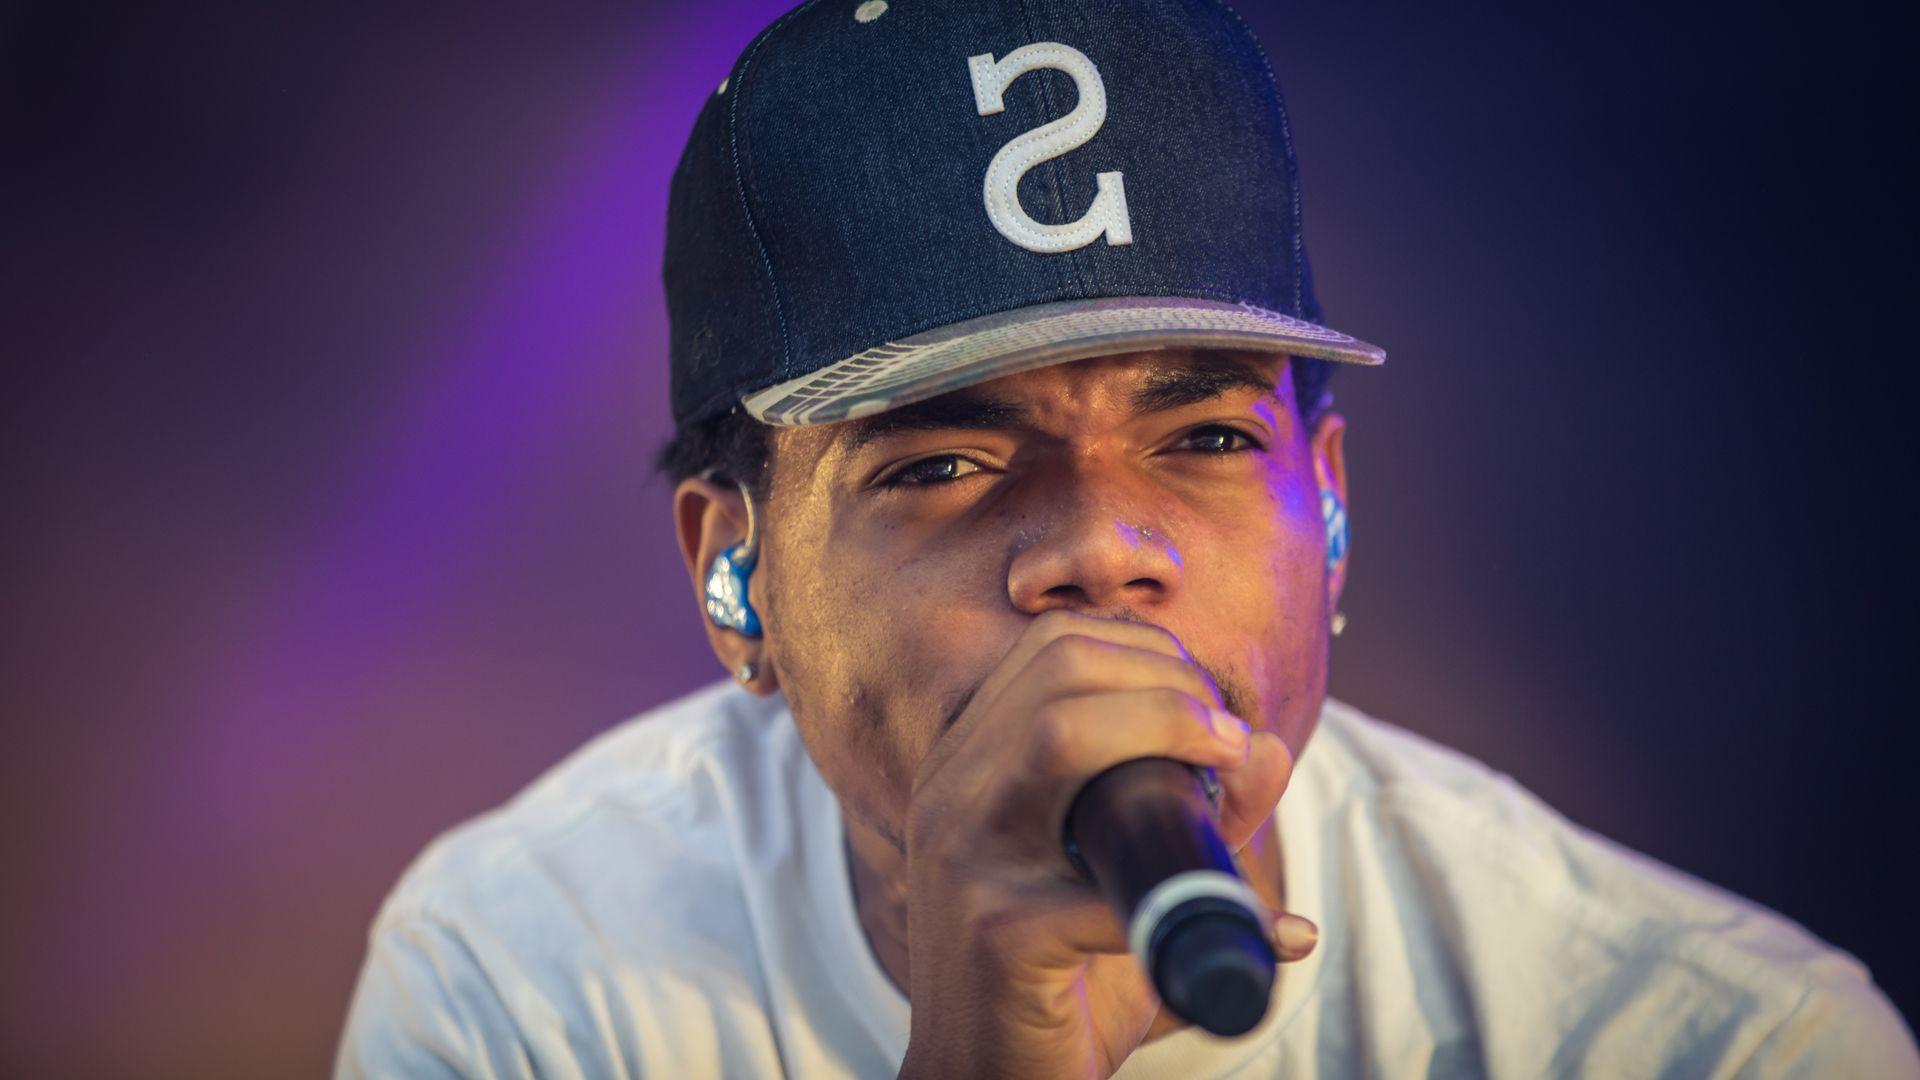 Chance The Rapper Wallpaper Backgrounds